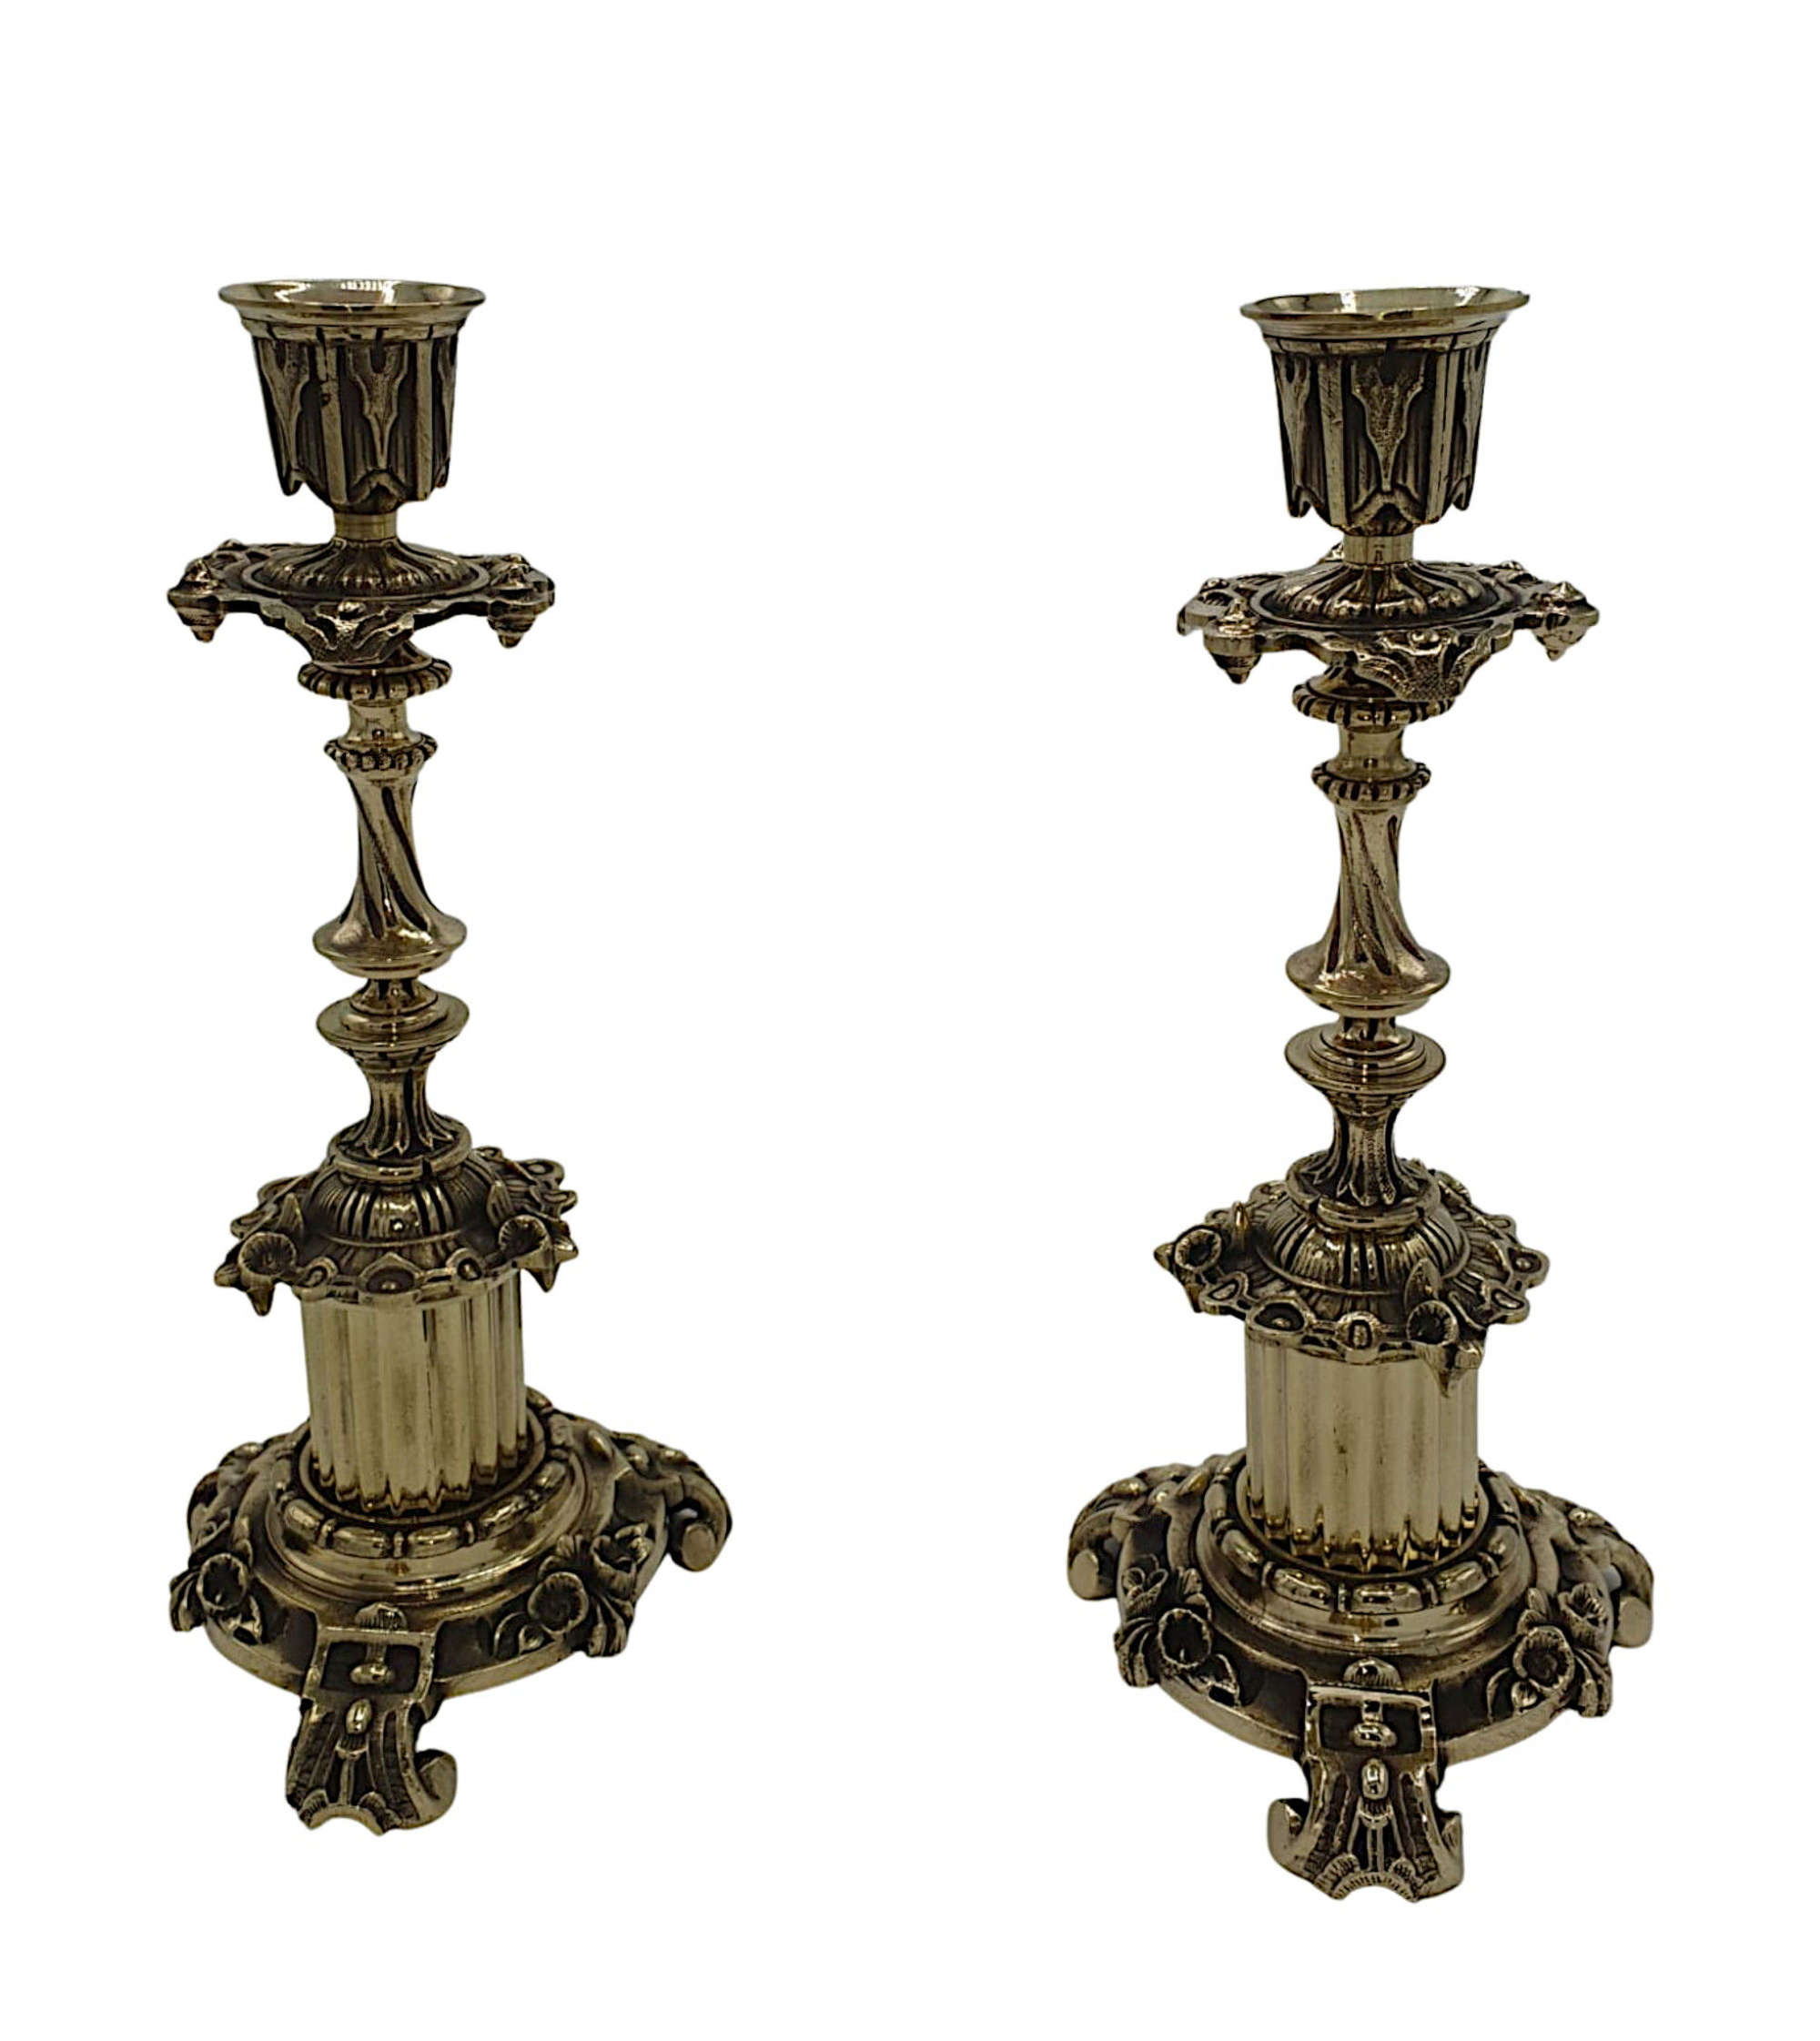 A Lovely Pair Of 19th Century Polished Brass Candle Sticks